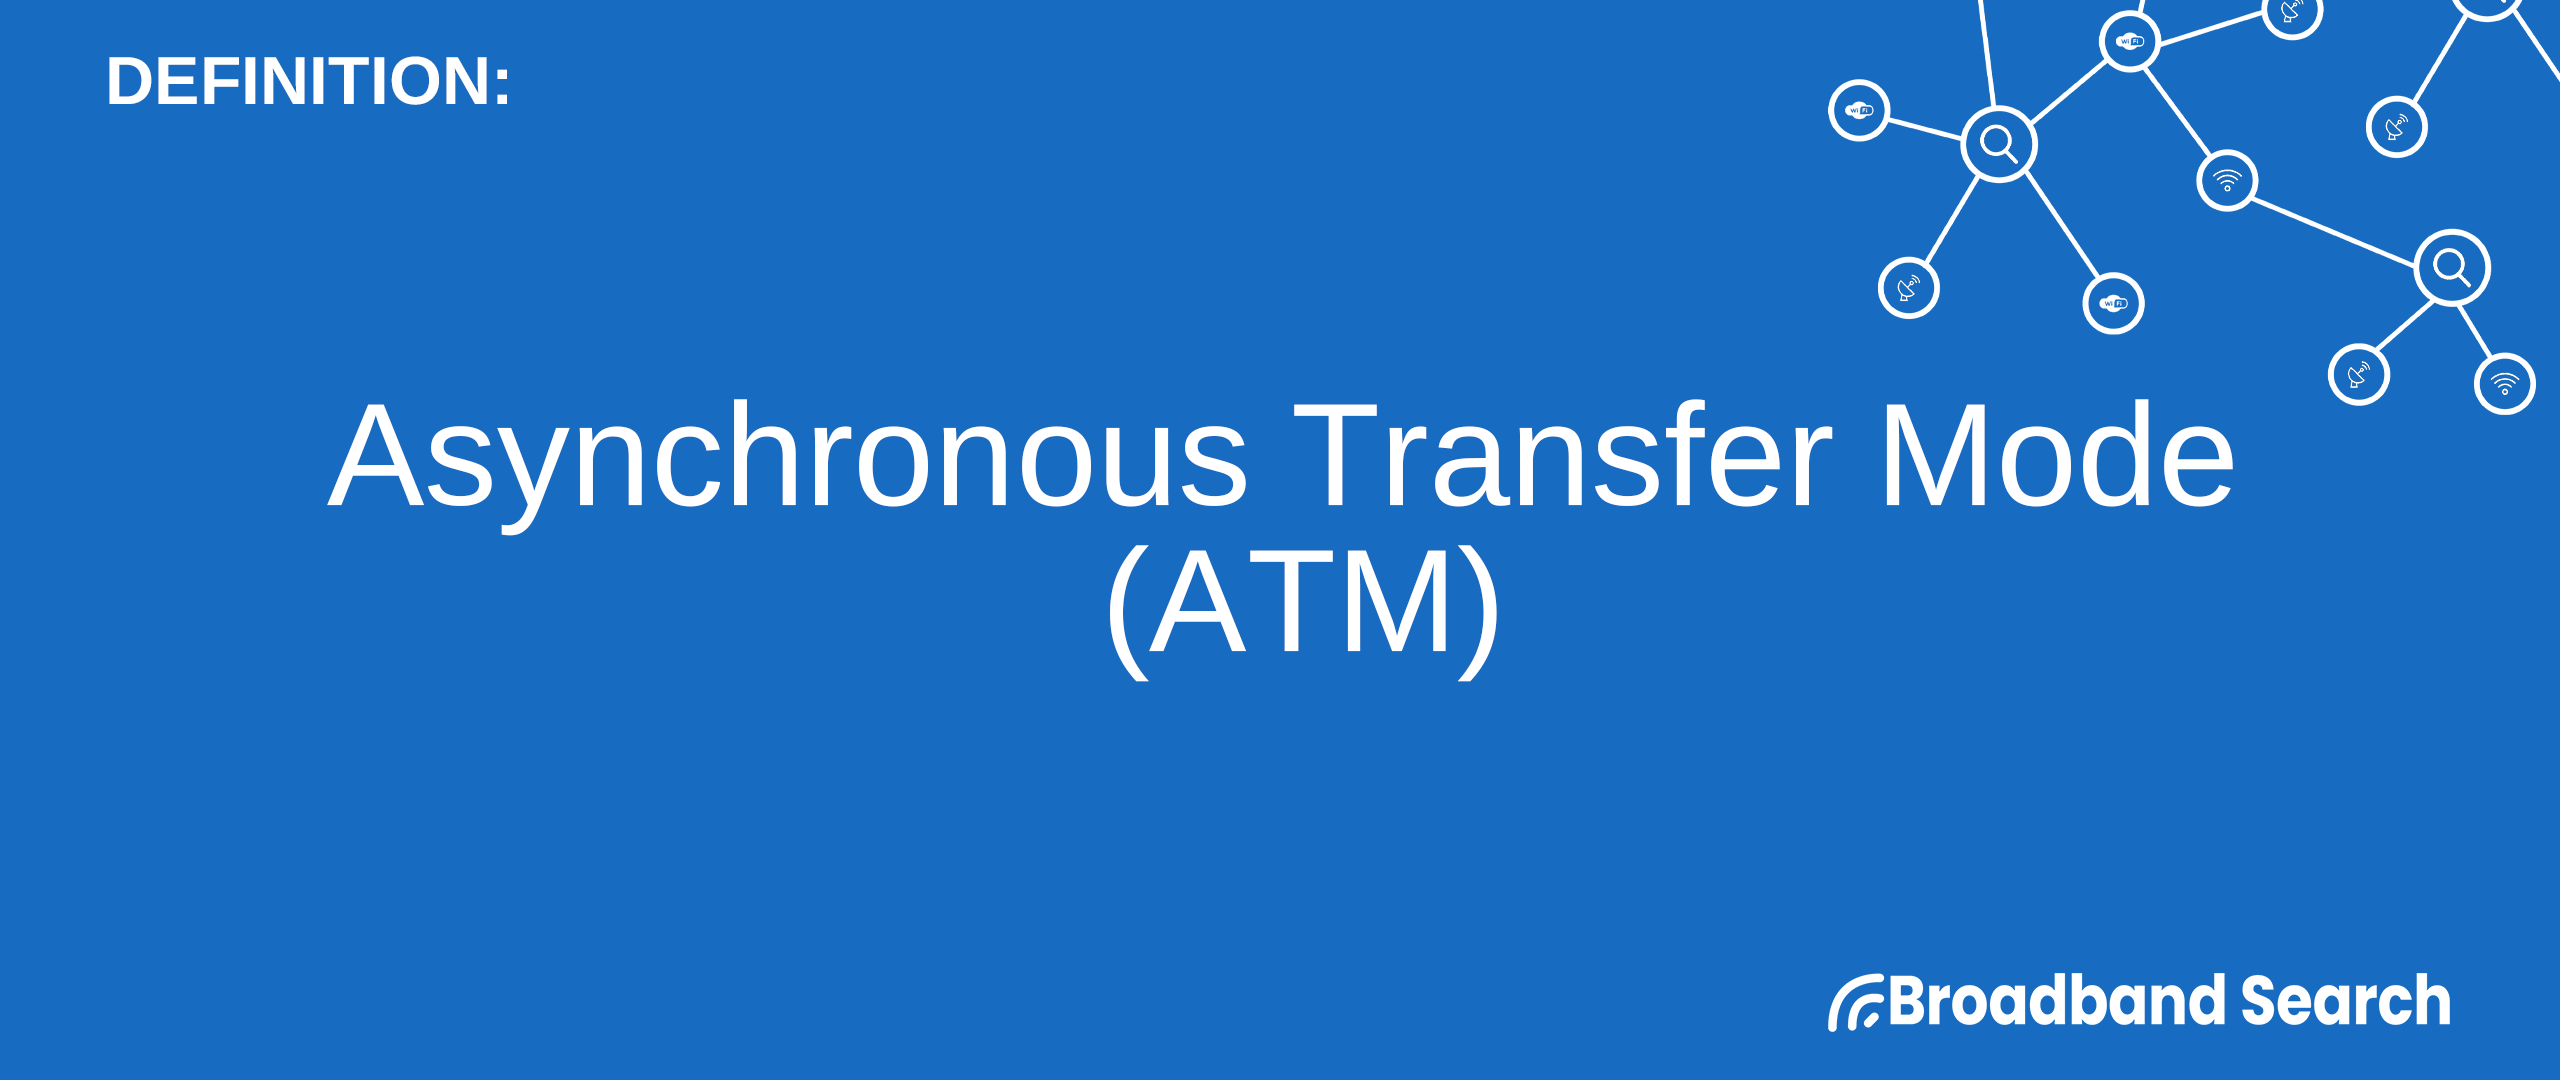 Defining Asynchronous Transfer Mode Atm Definition Key Aspects